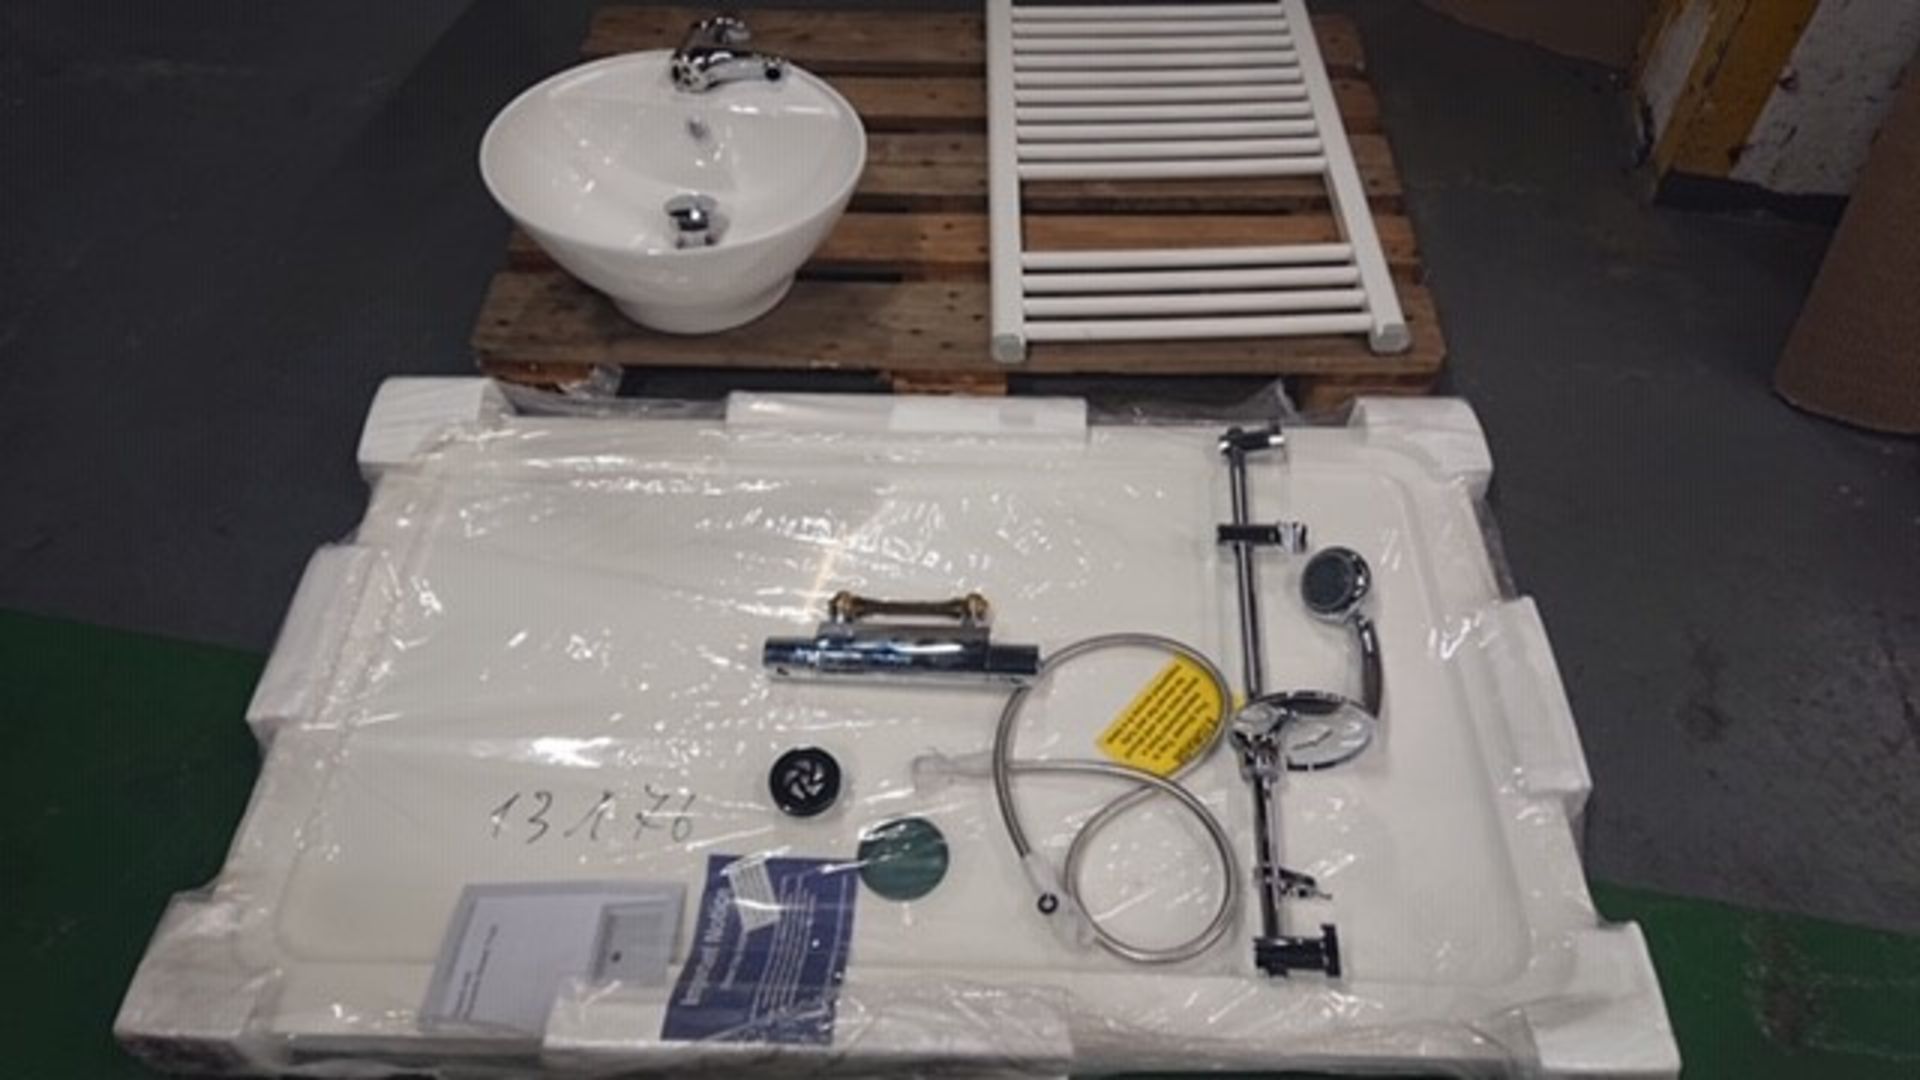 *Shower Pack Consisting of Shower Tray, Fittings, Towel Rail, etc.